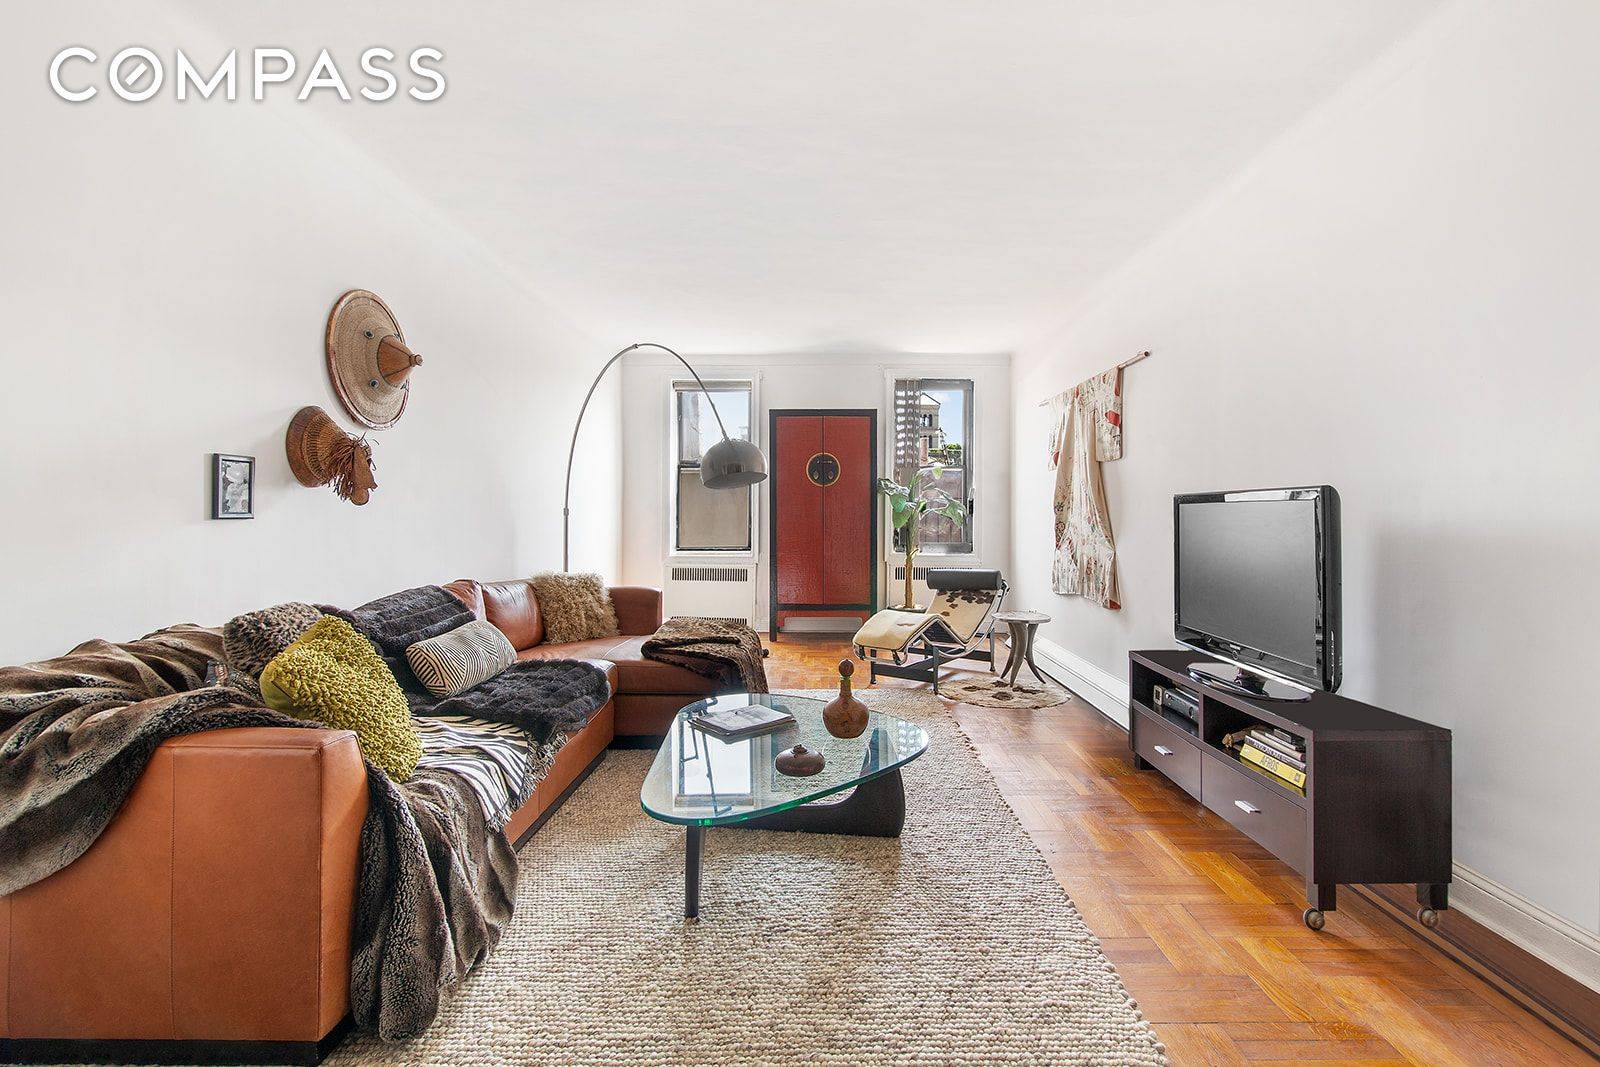 Welcome to 960 Sterling Place, apartment 3L, a gorgeously renovated, two bedroom corner unit in a well run pre war building located in the Crown Heights North Historic District.